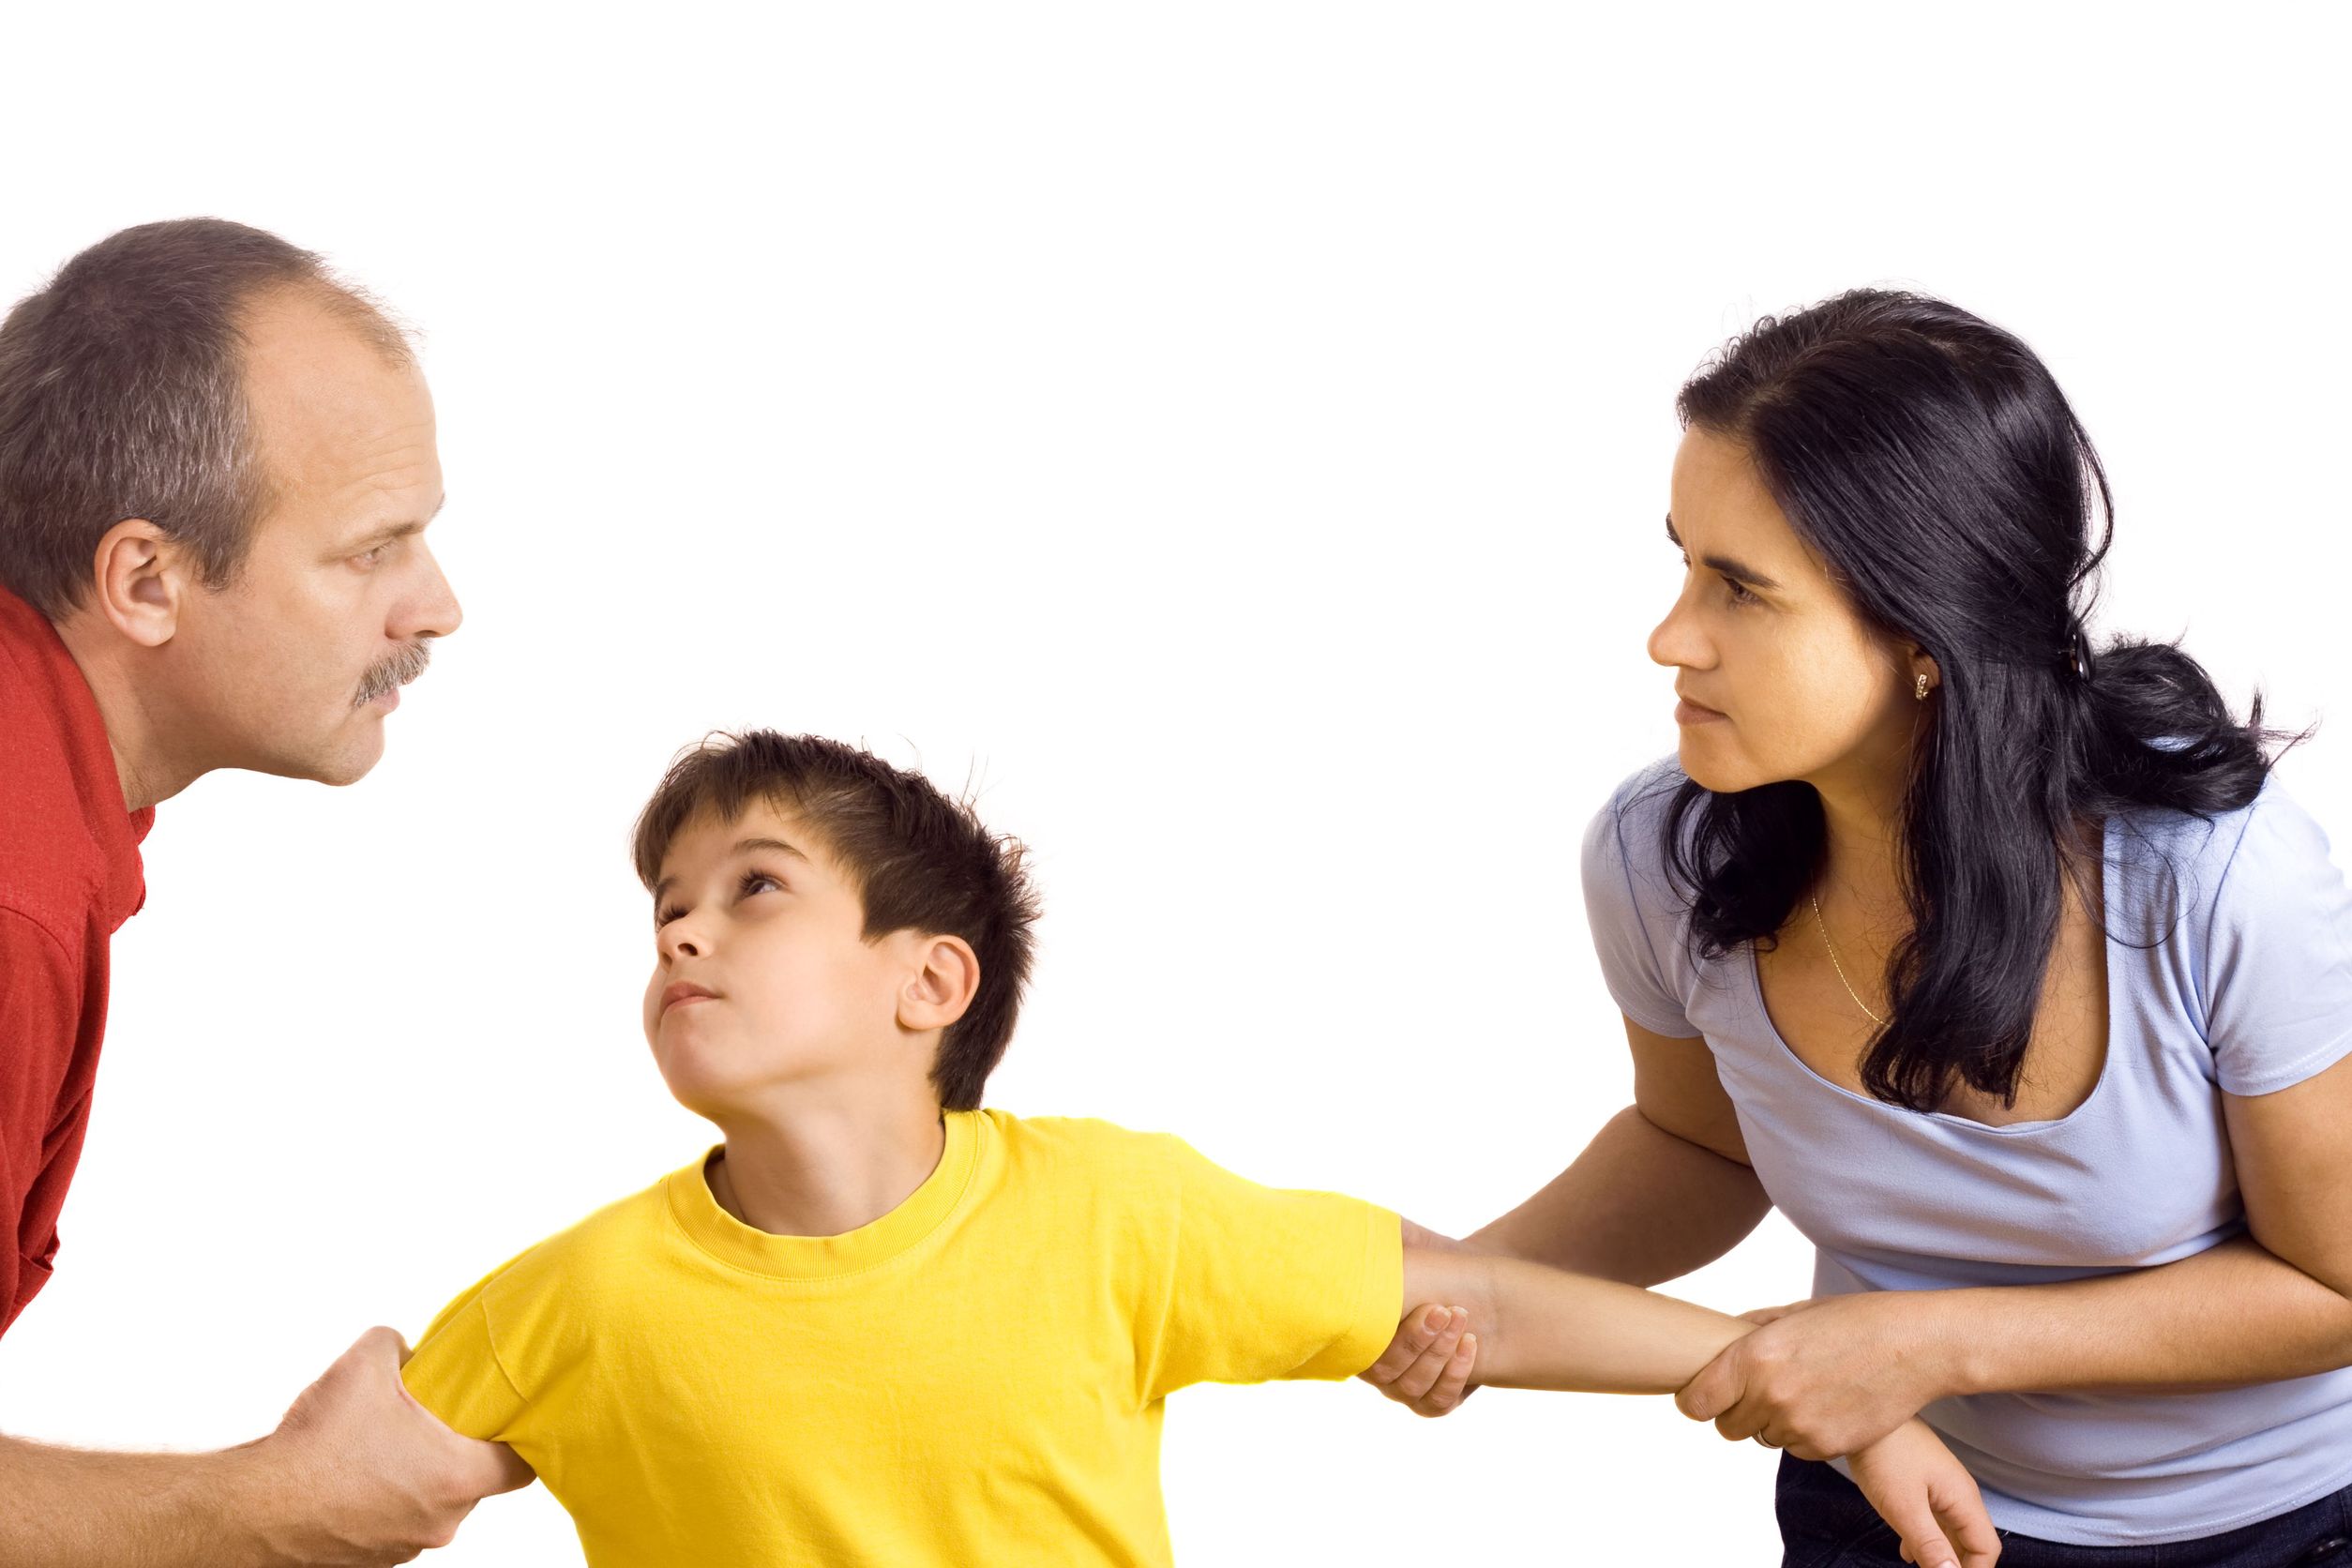 How Do They Determine Who Gets Custody?Johnson Law Group